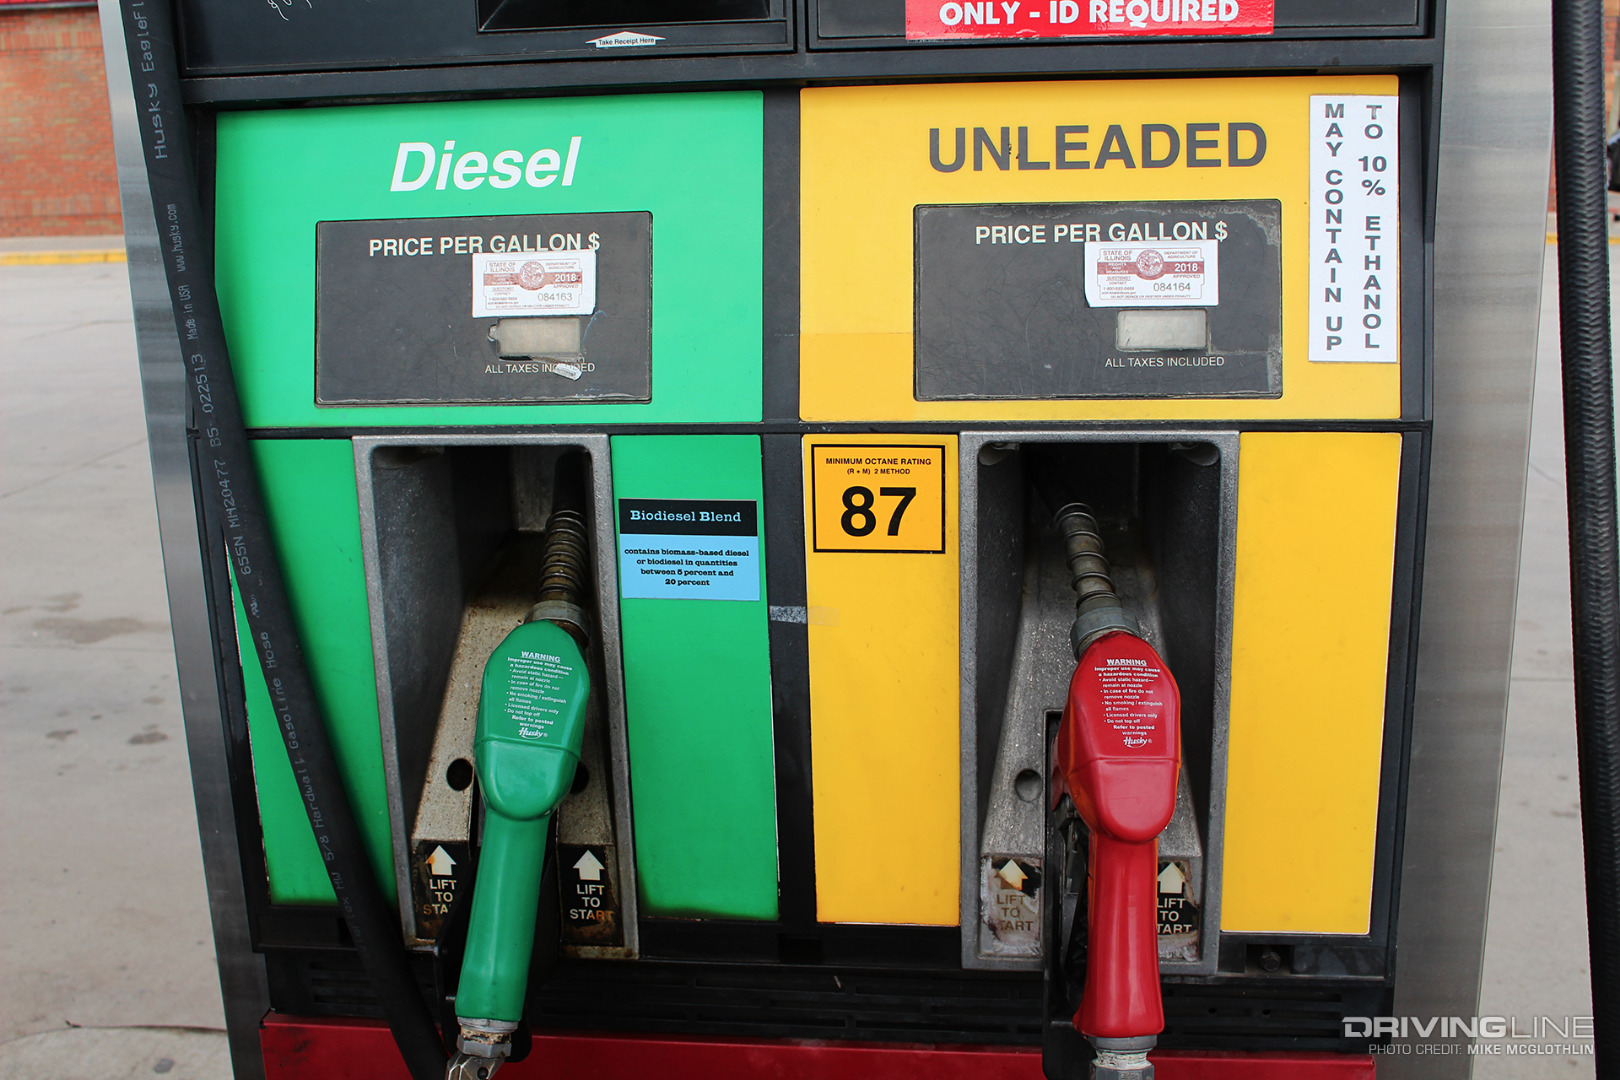 Diesel fuel down 11 cents and now at $3.91